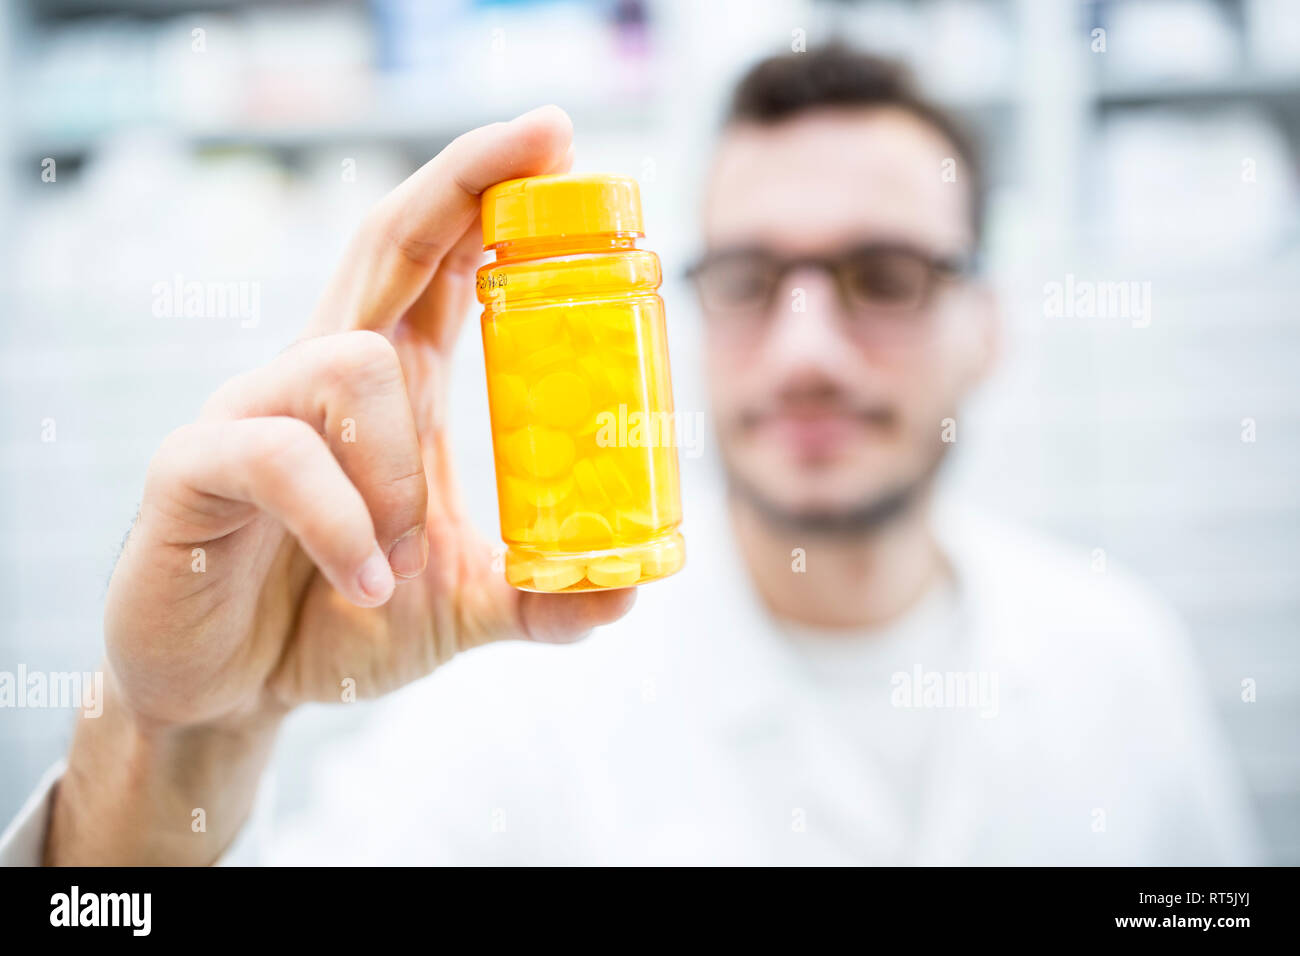 Close-up of pharmacist holding pill box in pharmacy Stock Photo